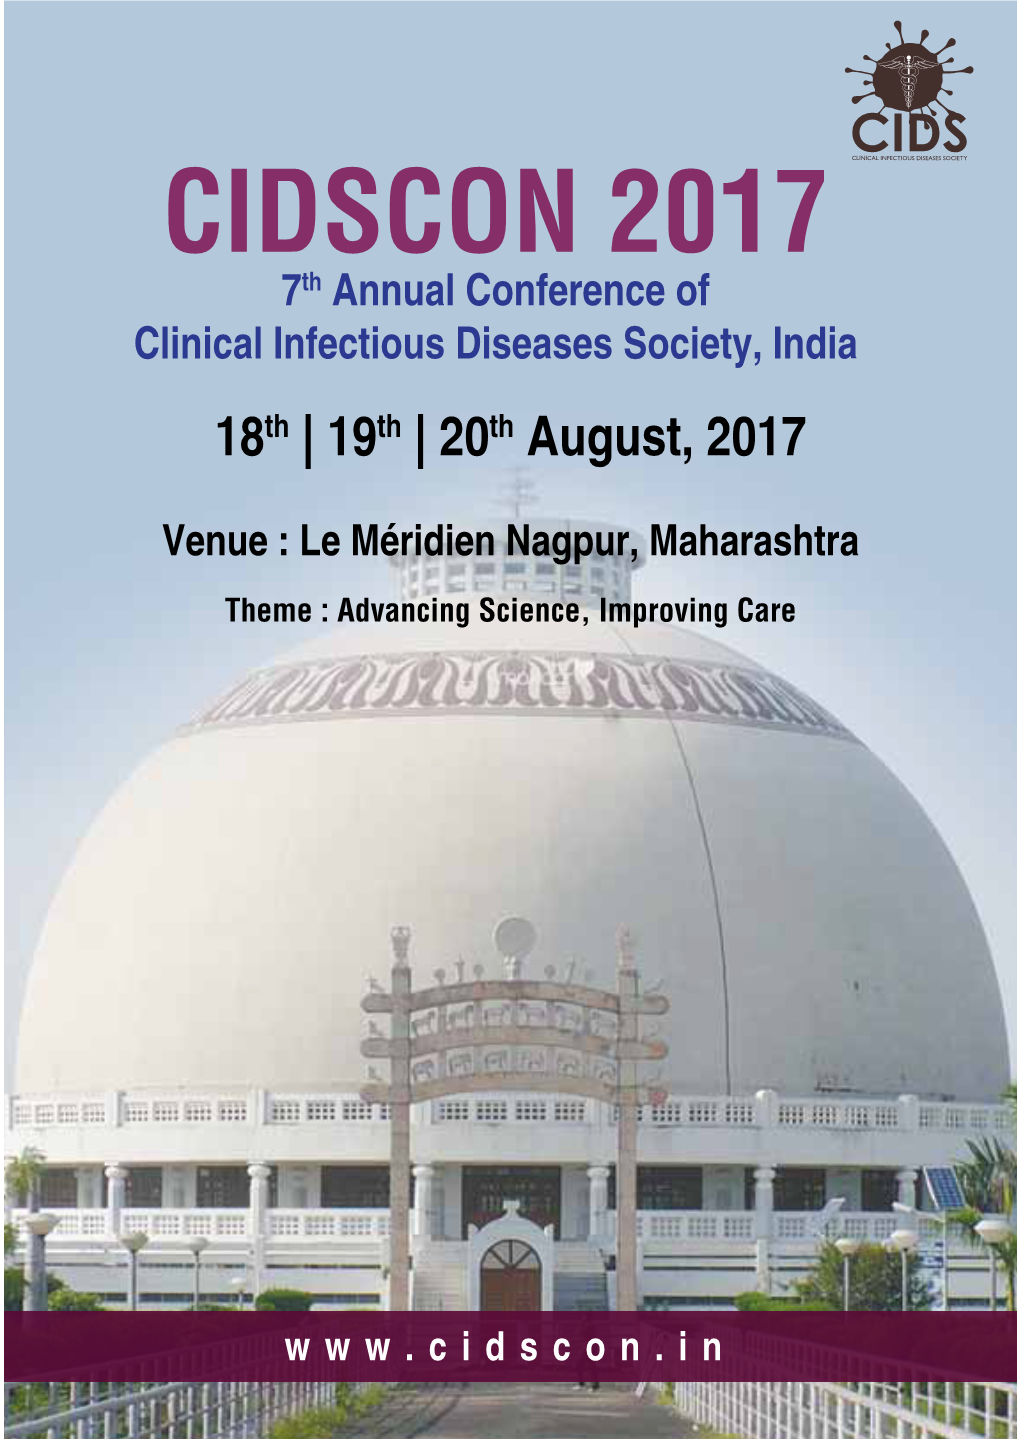 CIDSCON 2017 7Th Annual Conference of Clinical Infectious Diseases Society, India 18Th | 19Th | 20Th August, 2017